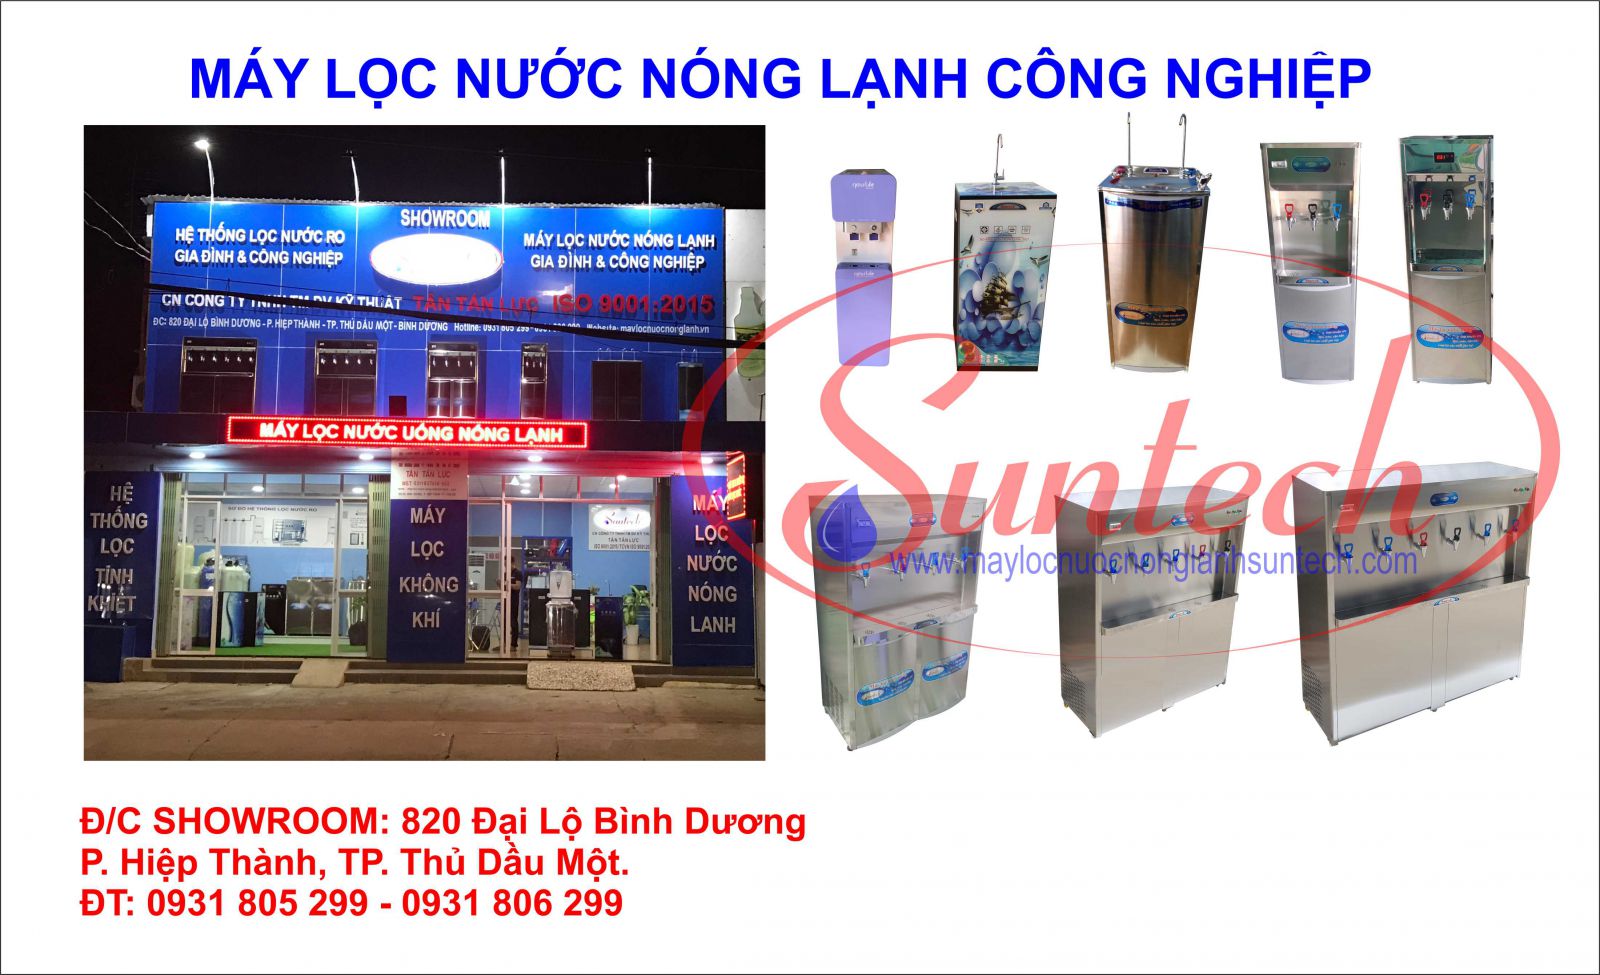 lam-the-nao-de-biet-may-loc-nuoc-nong-lanh-cong-nghiep-chat-luong